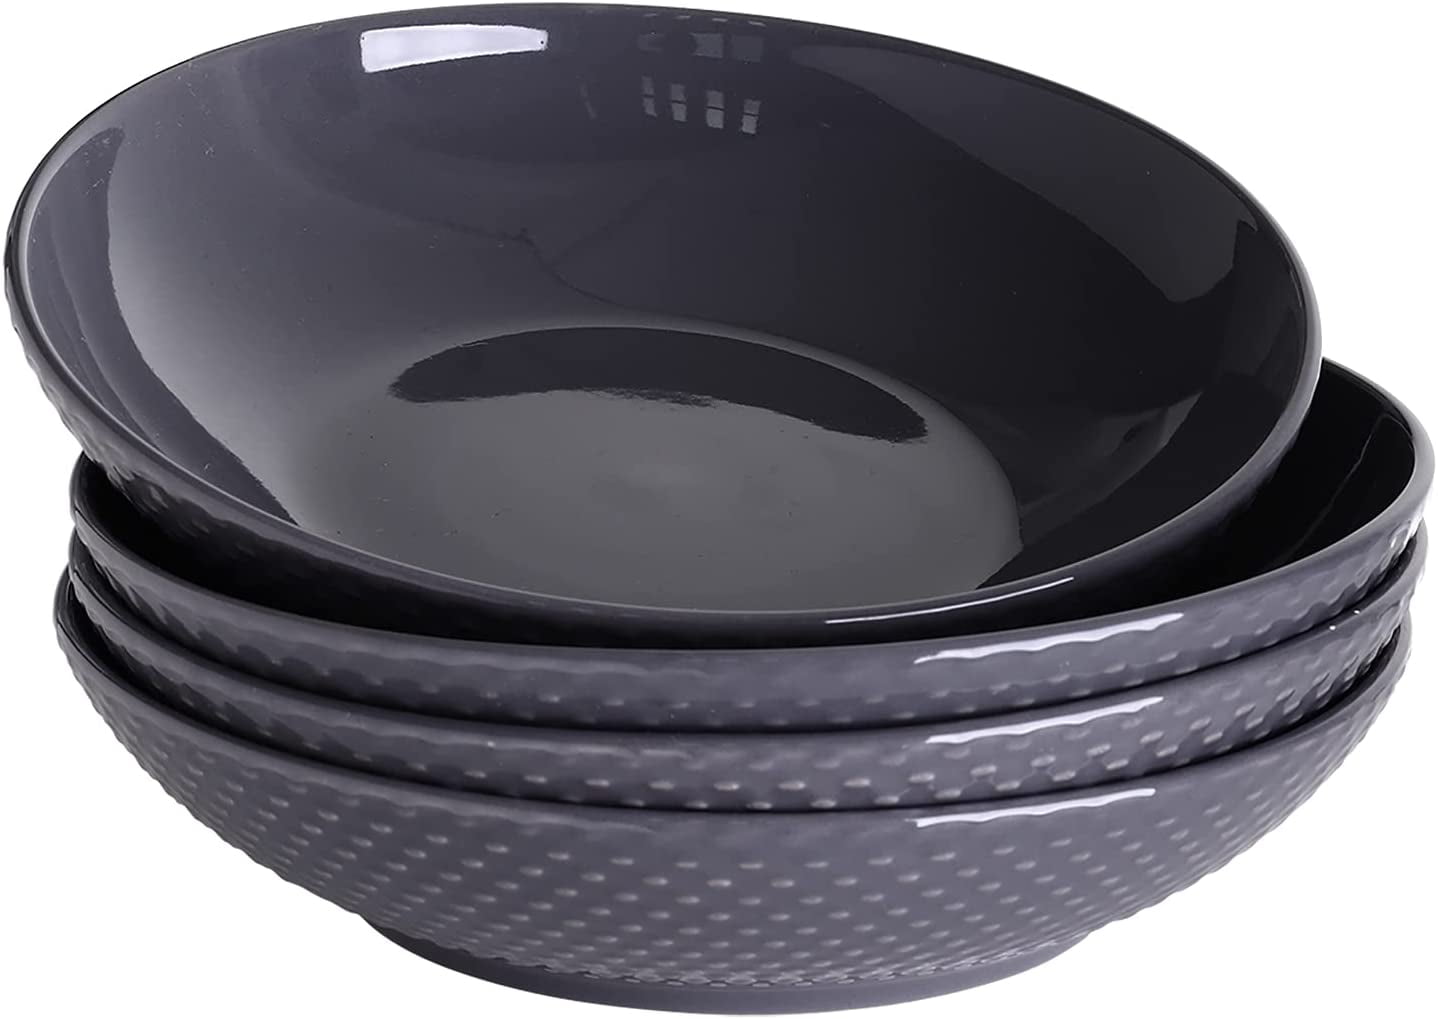 This Top-Rated Set of Pasta Bowls Is on Sale at